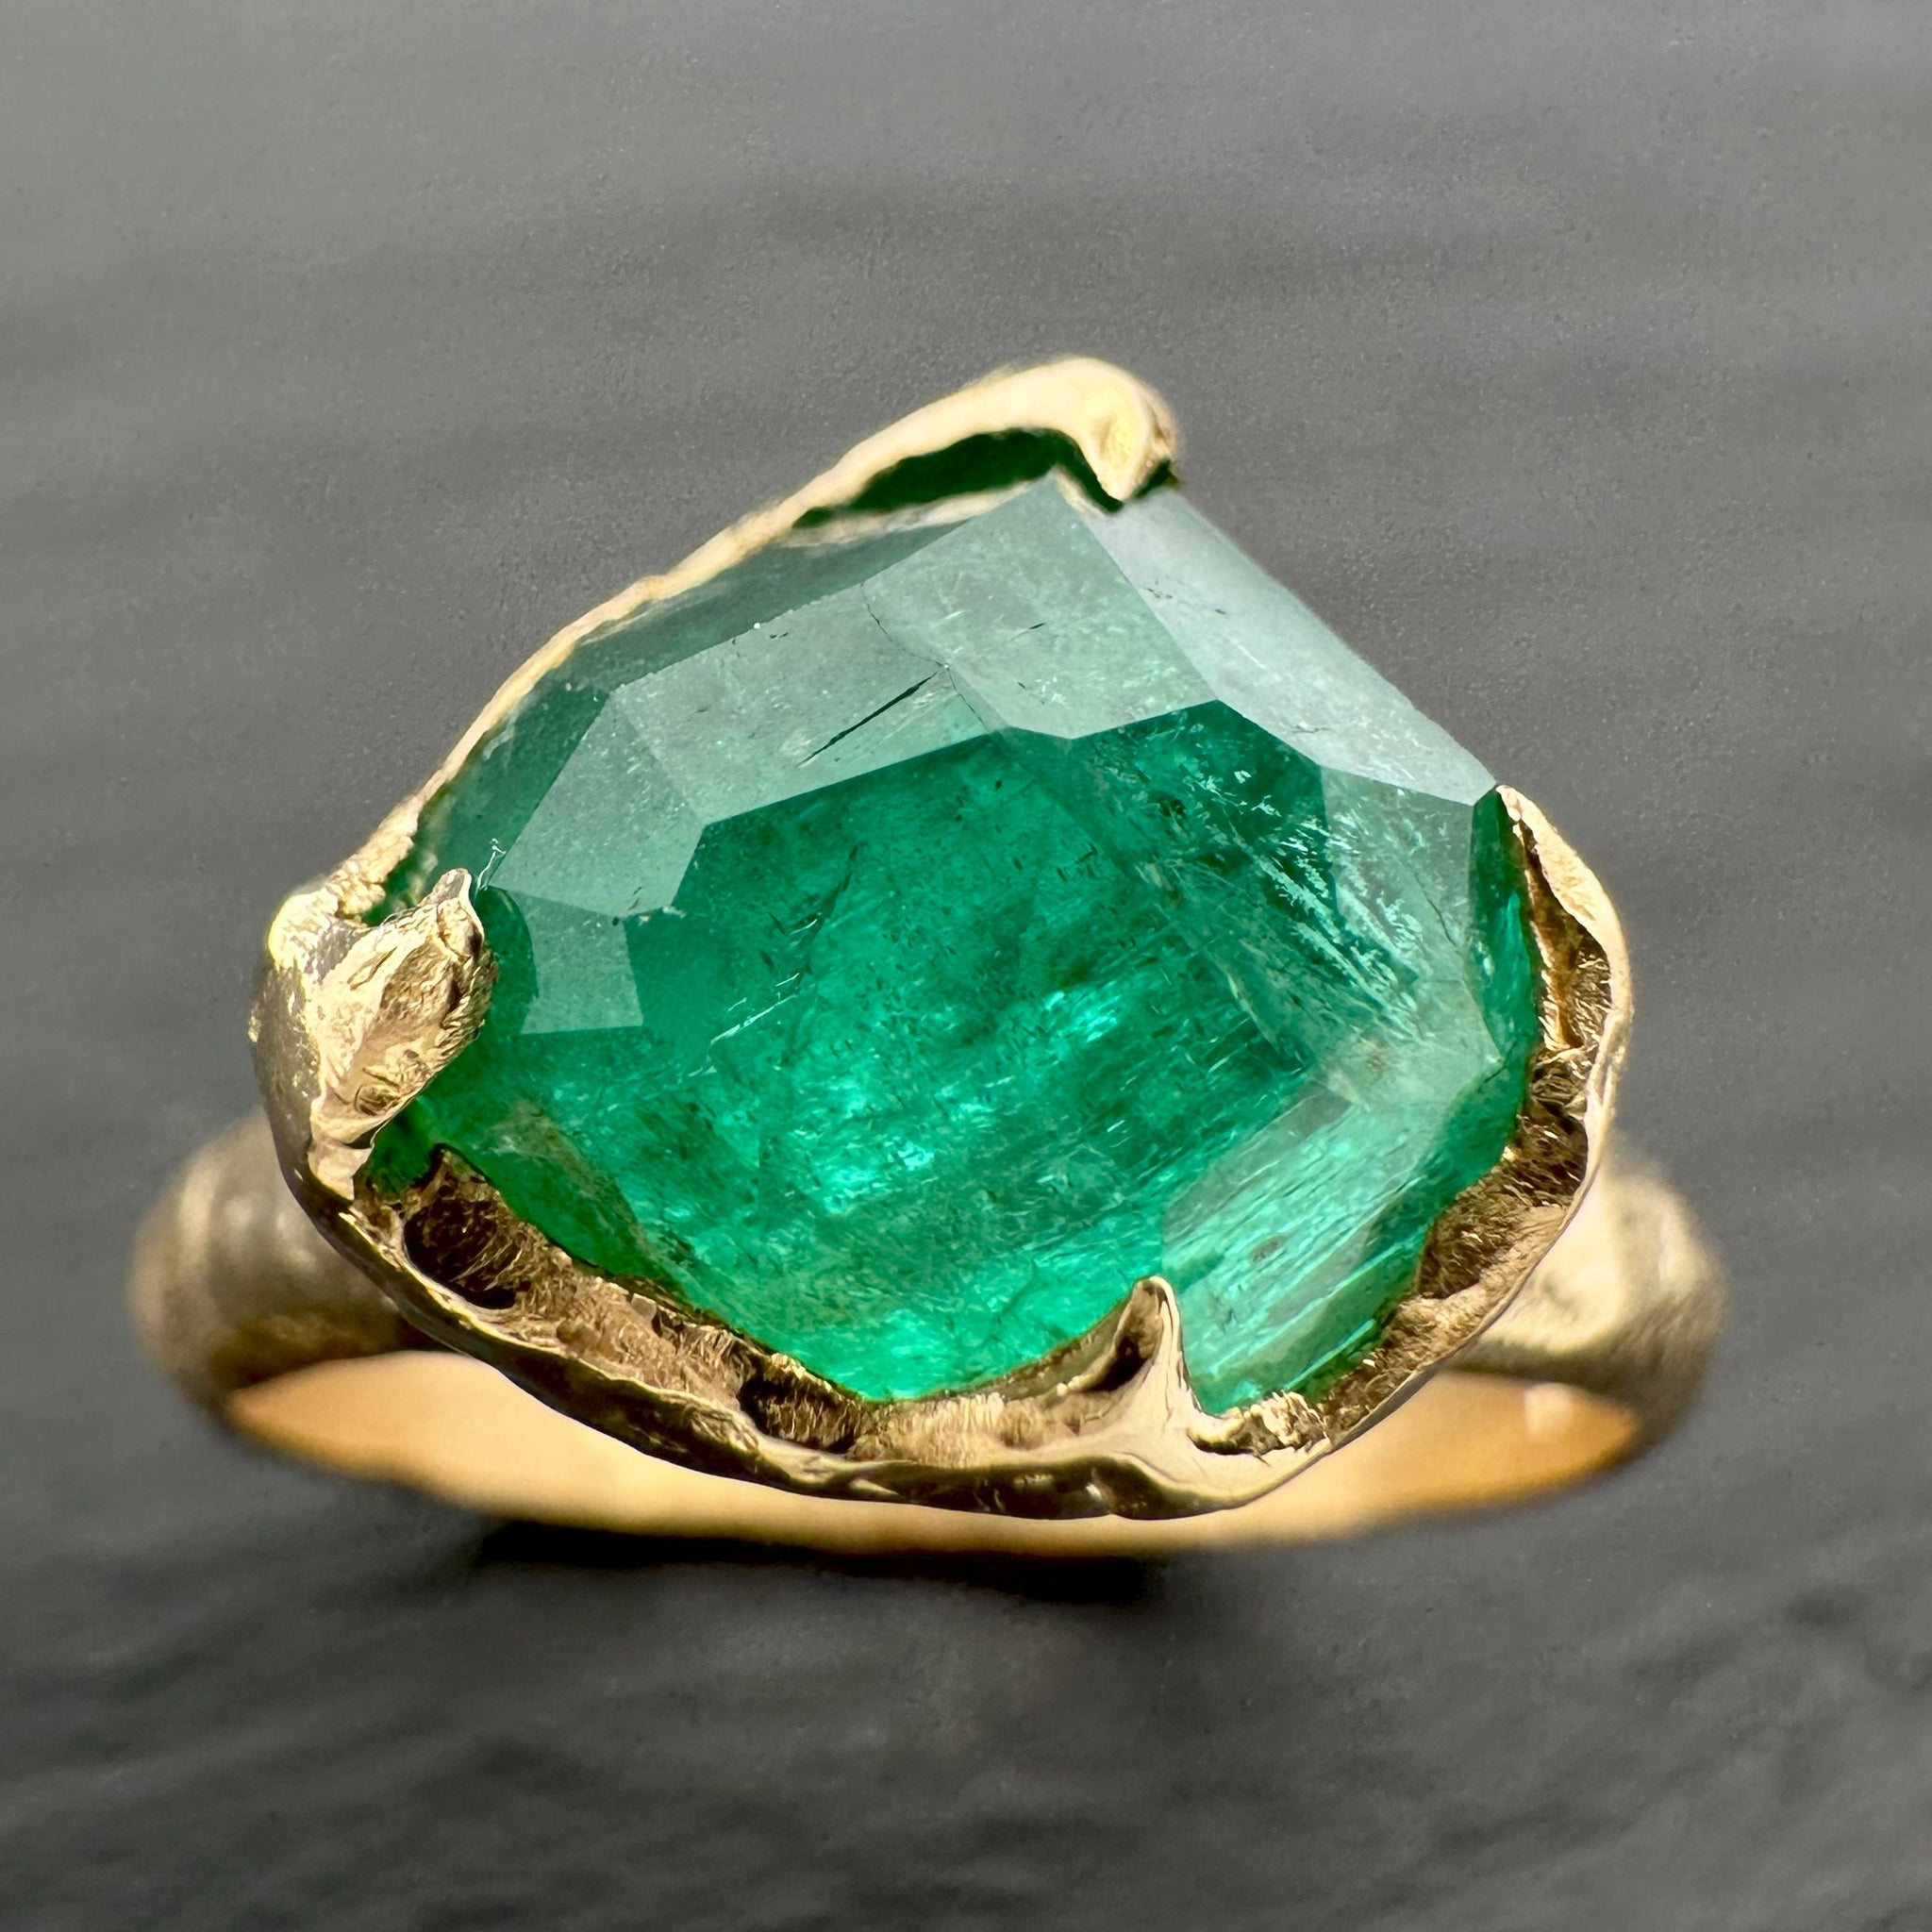 Partially Faceted Emerald Solitaire yellow 18k Gold Ring Birthstone One Of a Kind Gemstone Cocktail Ring Recycled 3480